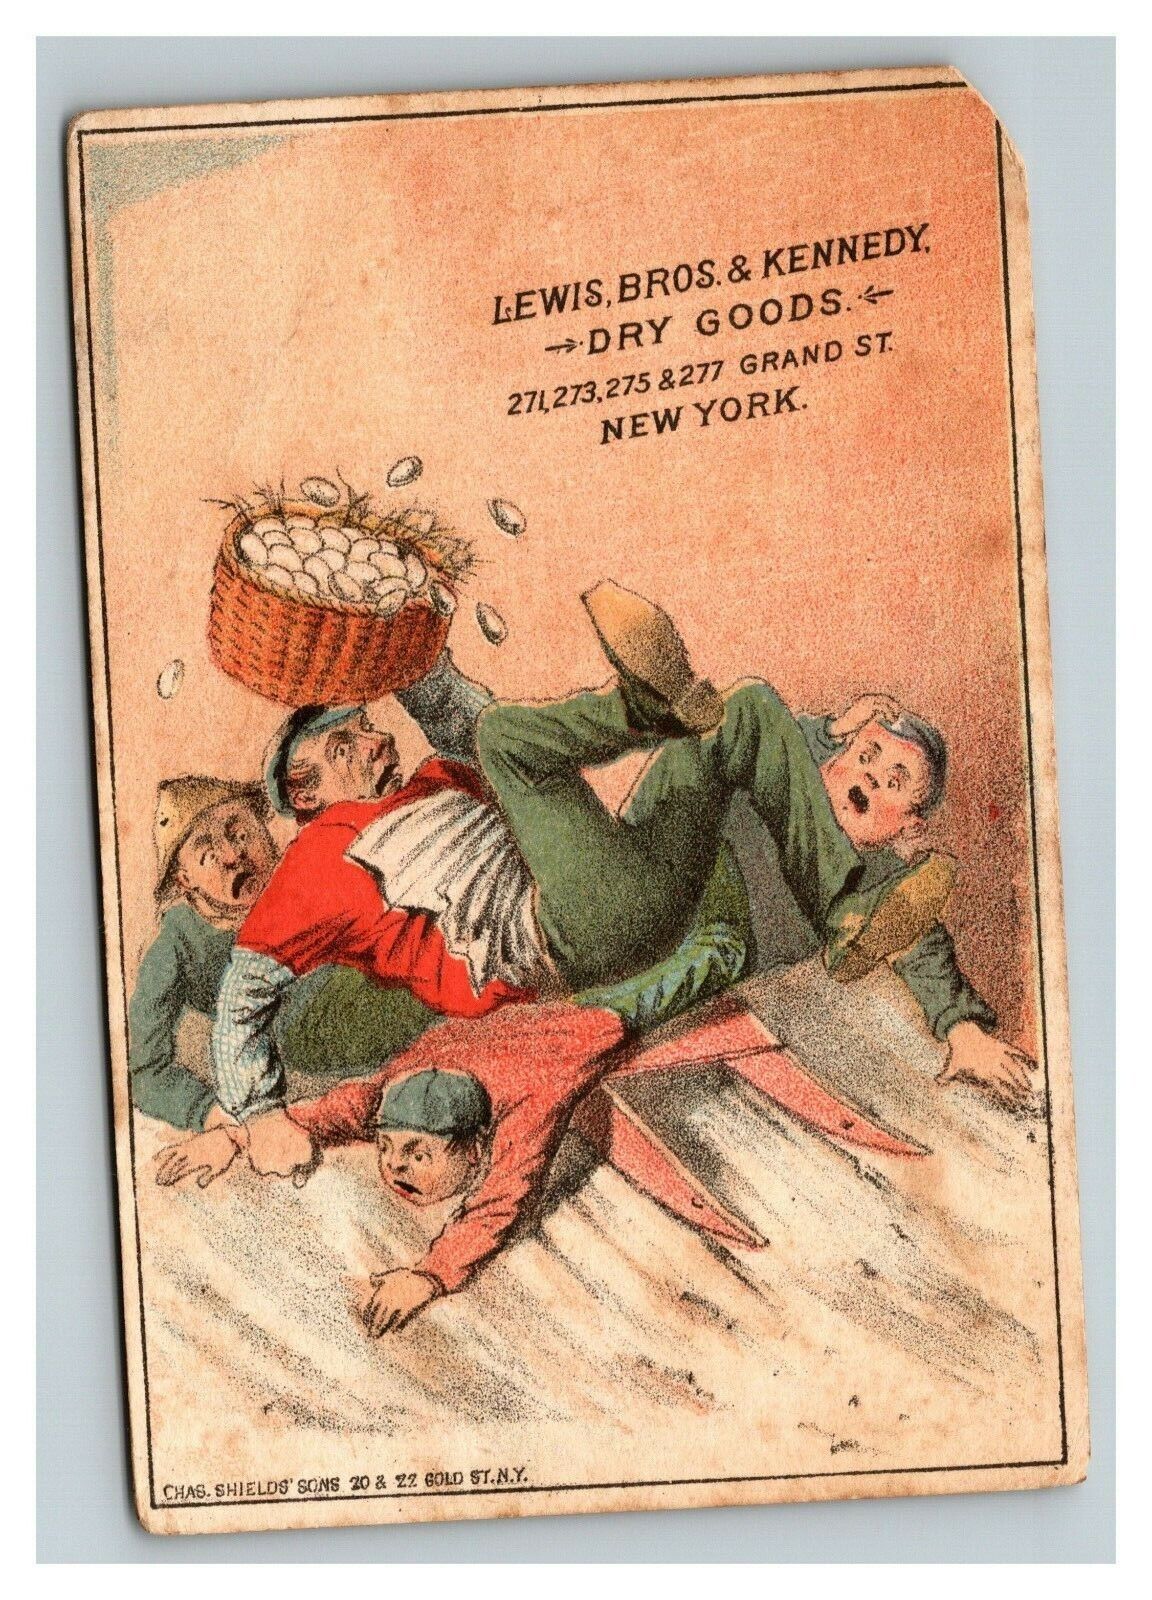 Vintage 1840\'s Trade Card - Lewis Brothers & Kennedy Dry Goods New York City NY